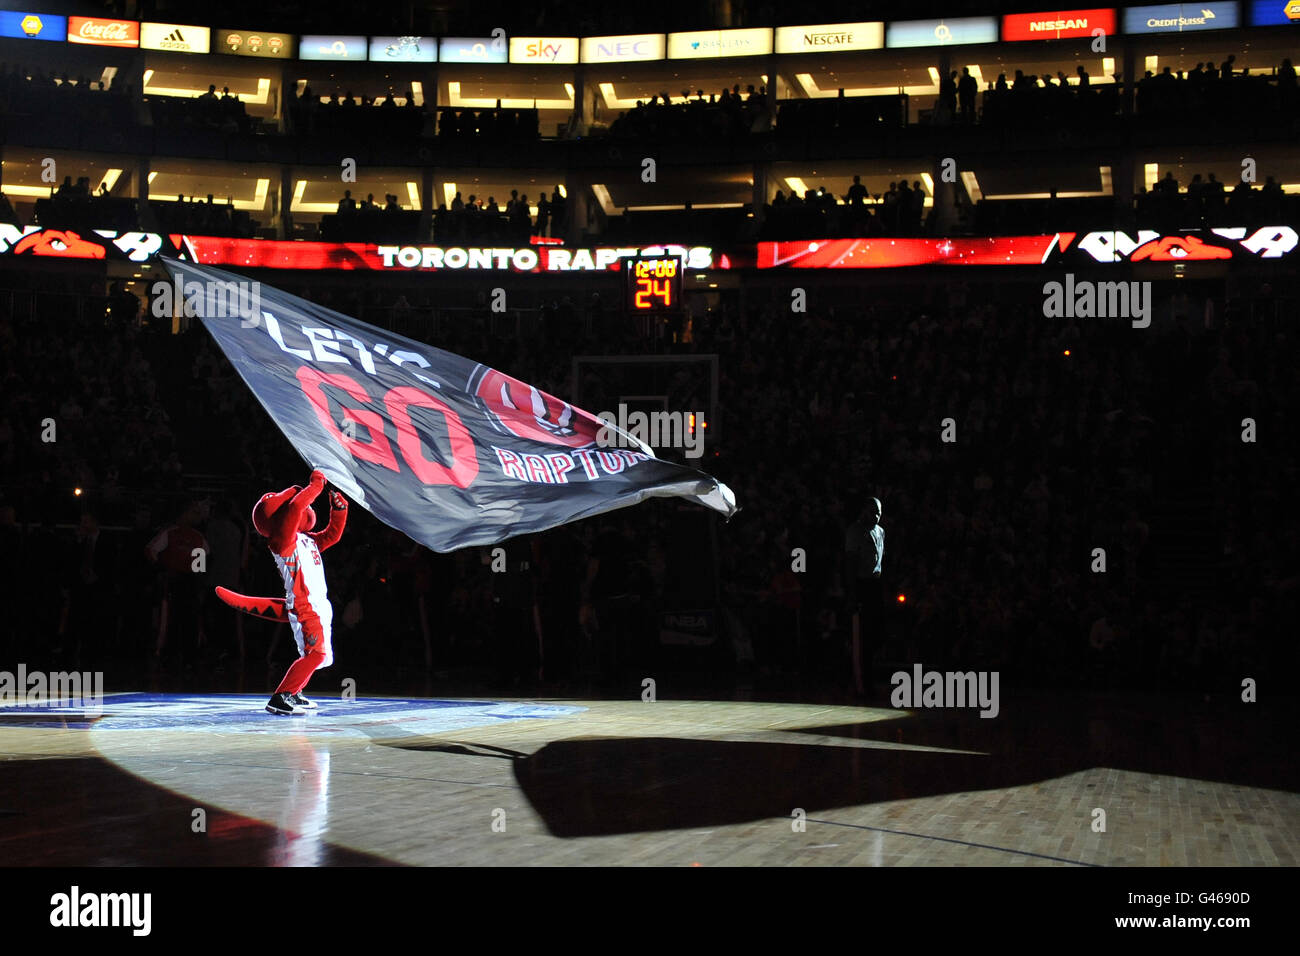 The Toronto Raptors mascot, The Raptor entertains the crowd before the game Stock Photo